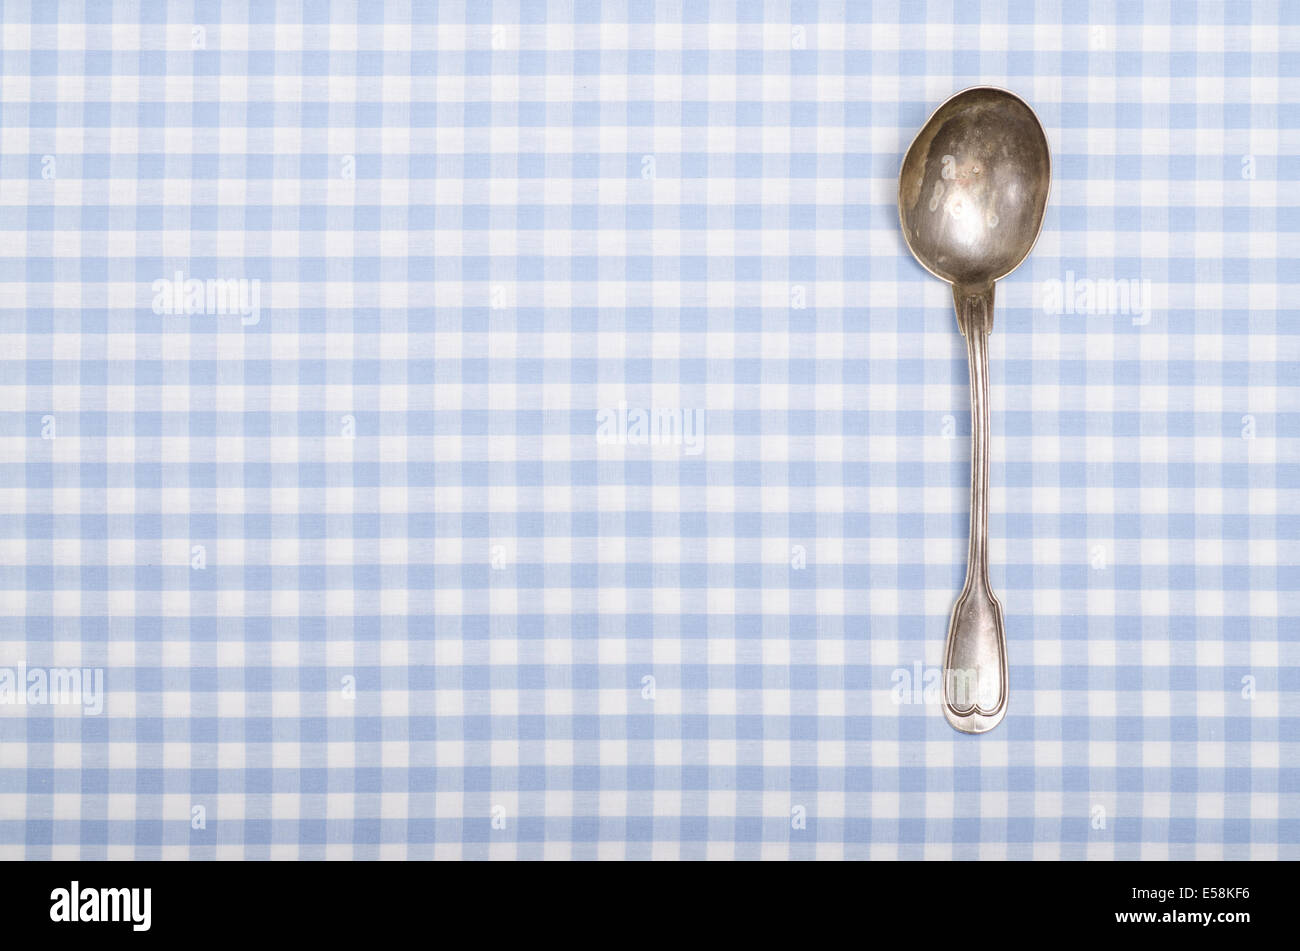 Old silver spoon on blue and white vichy table cloth with text space Stock Photo